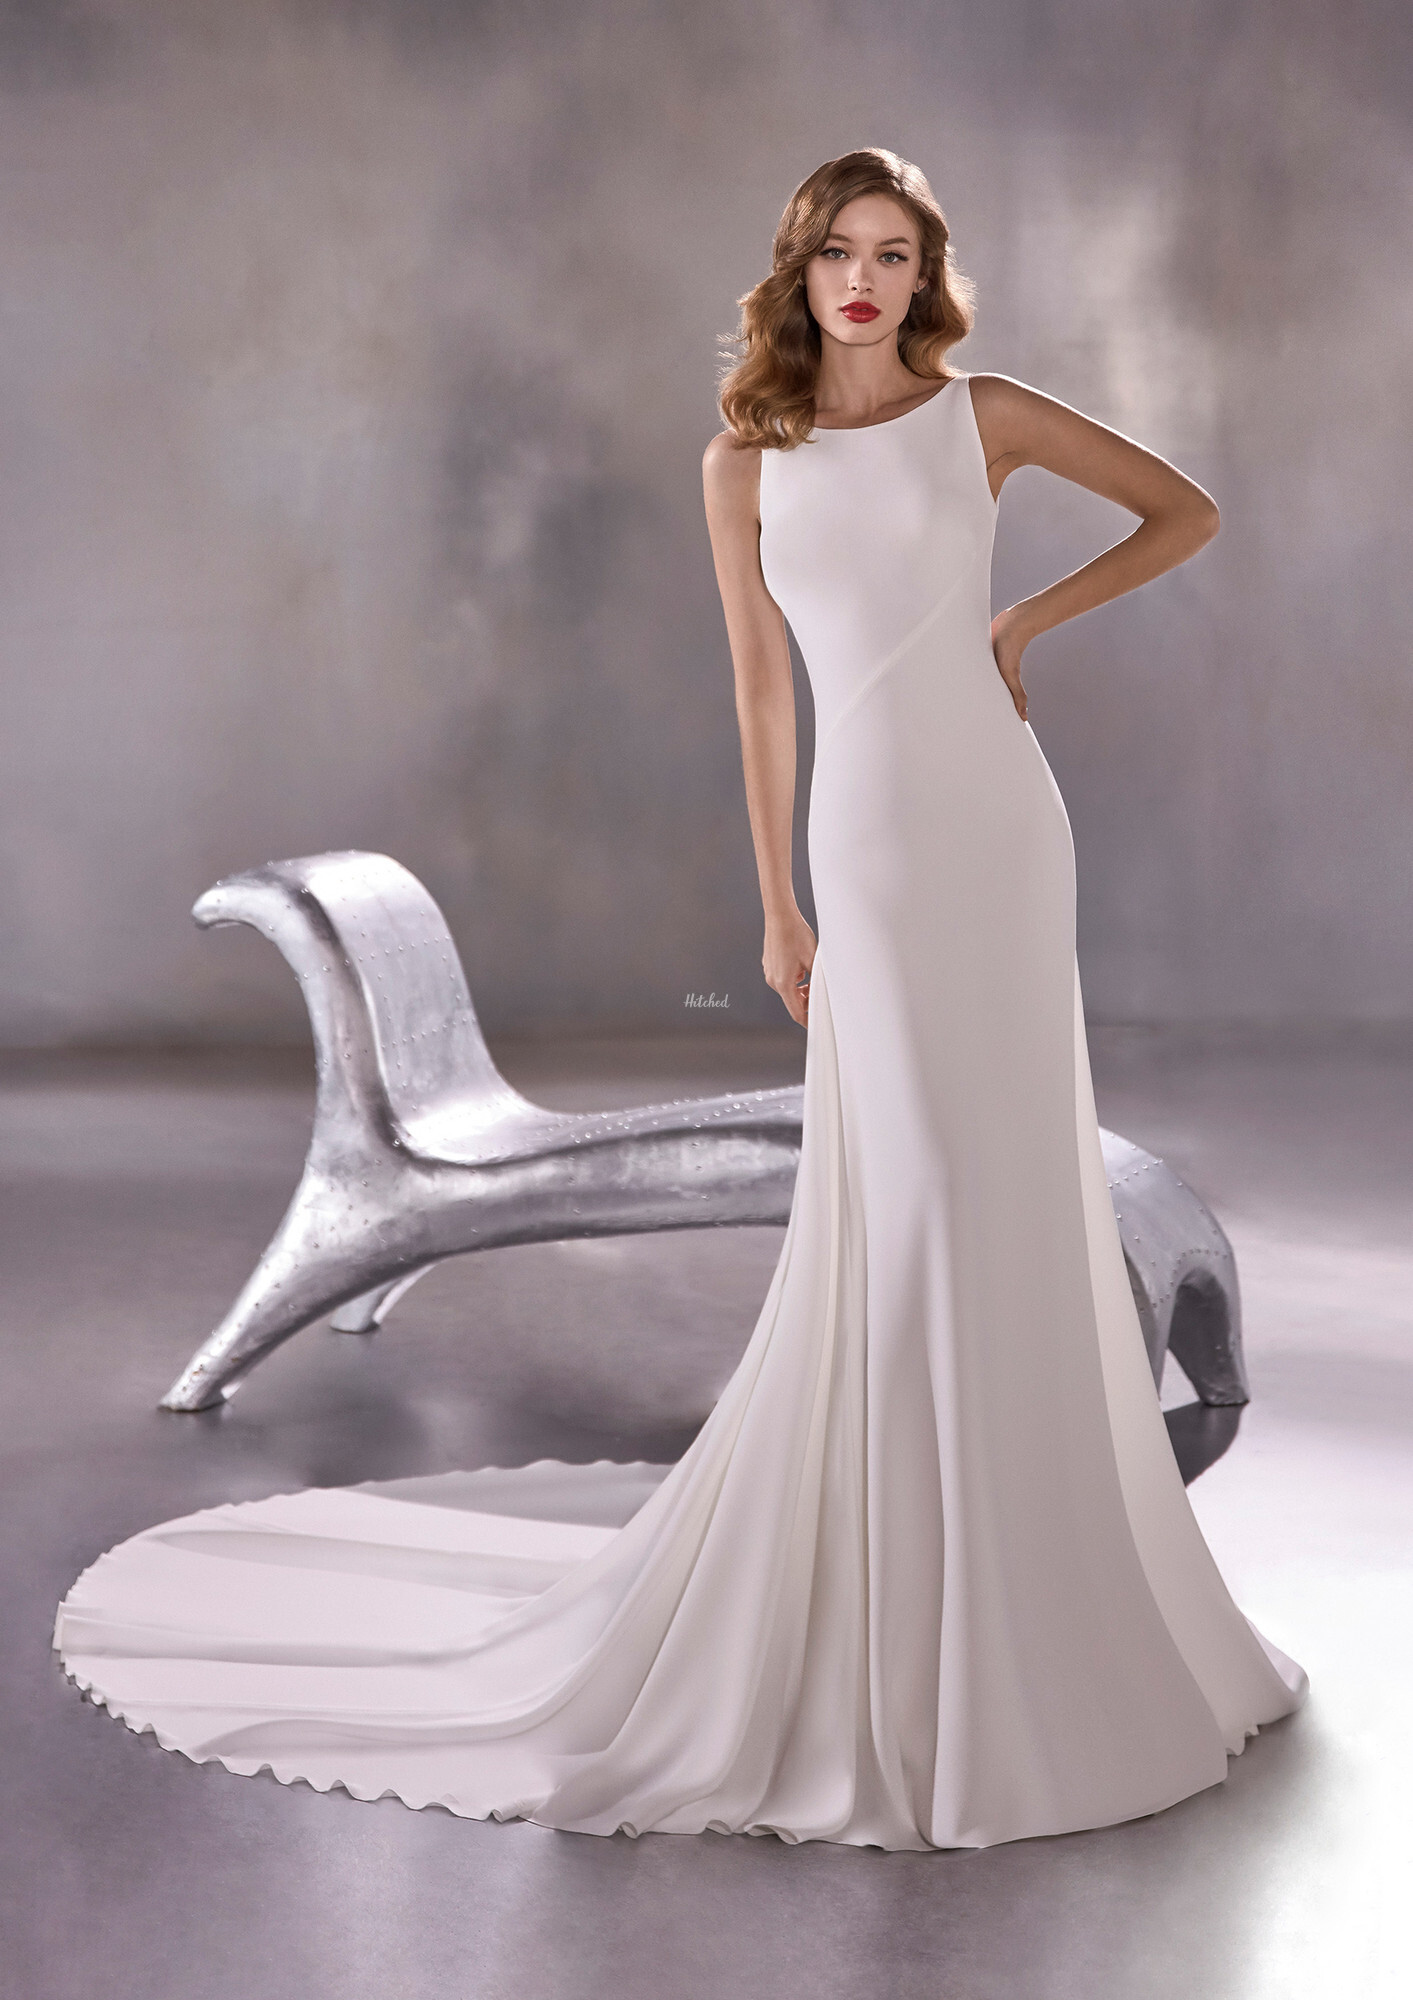 MOONSHADOW Wedding Dress from Atelier Pronovias - hitched ...